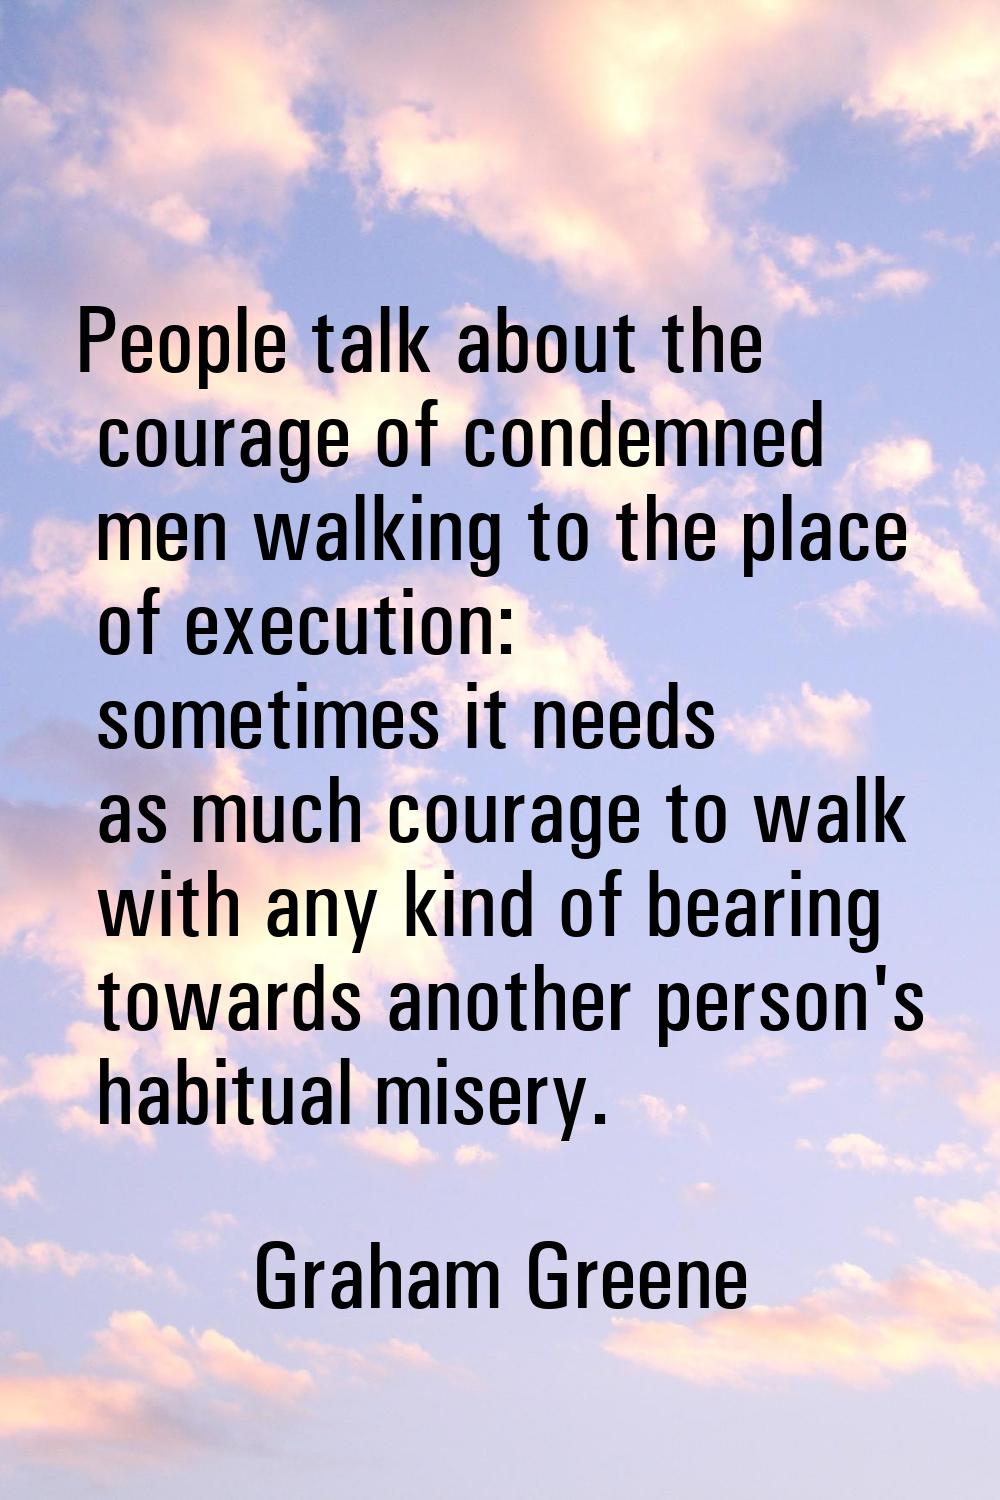 People talk about the courage of condemned men walking to the place of execution: sometimes it need